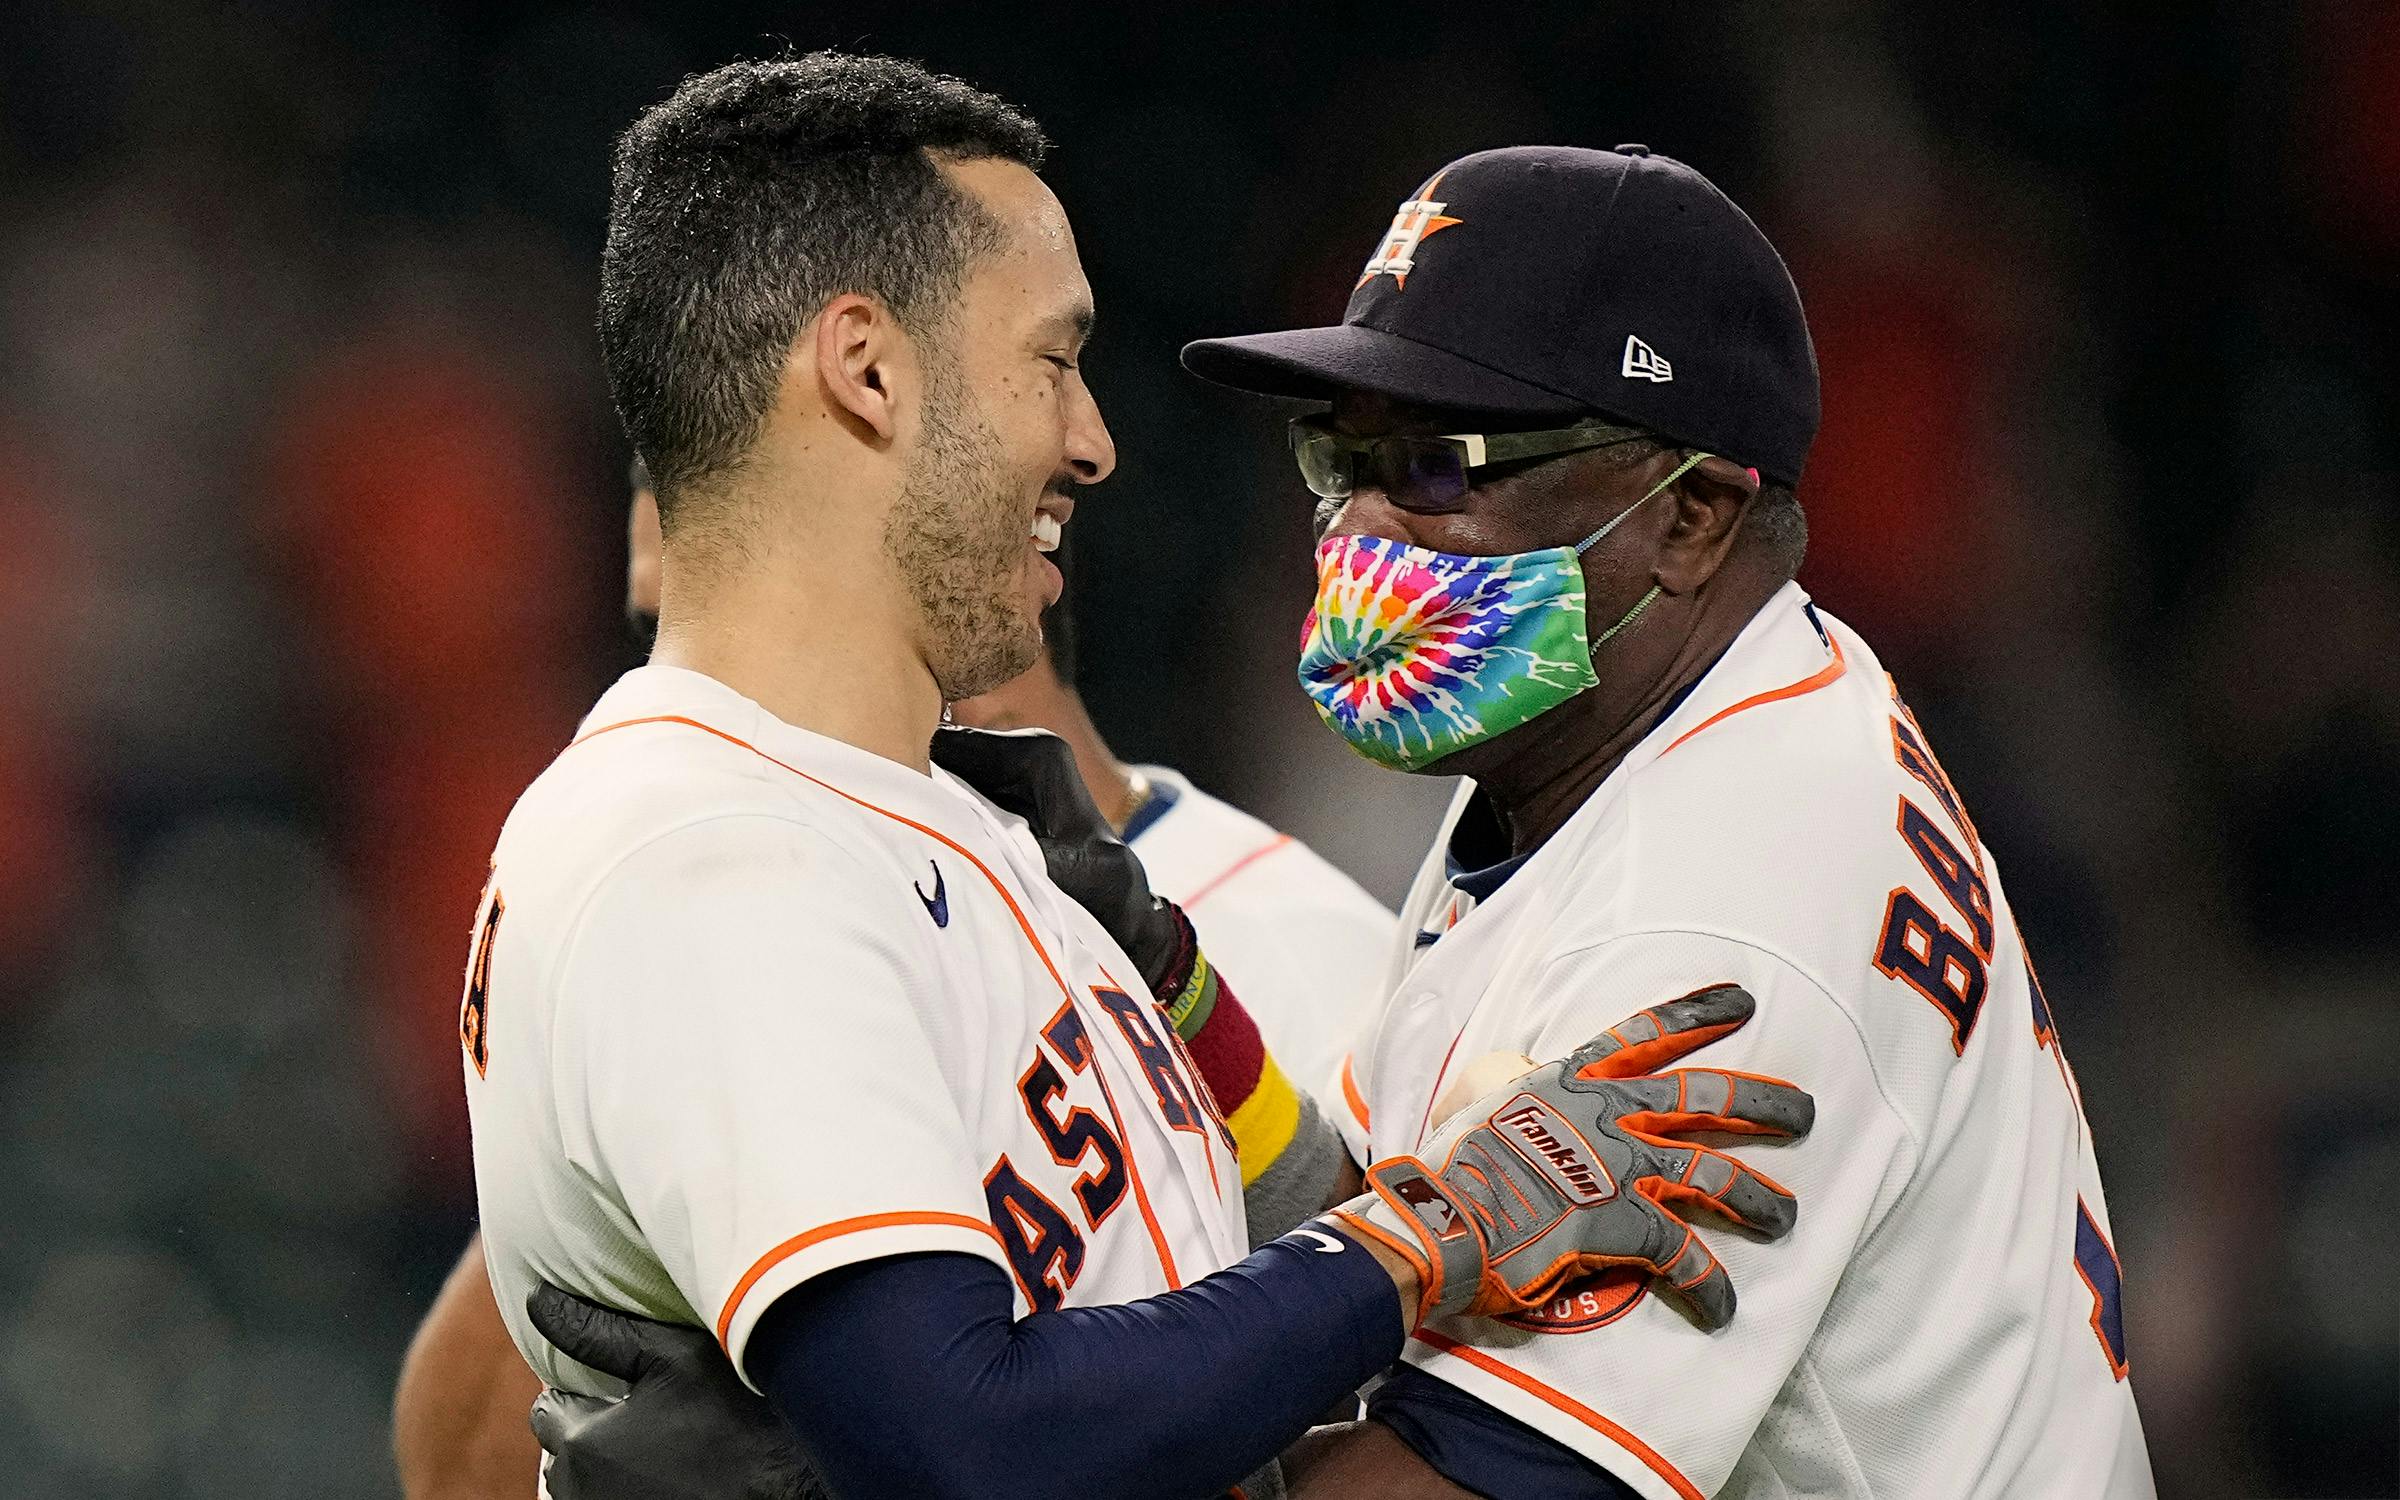 Look: Astros Players Booed Heavily Before All-Star Game - The Spun